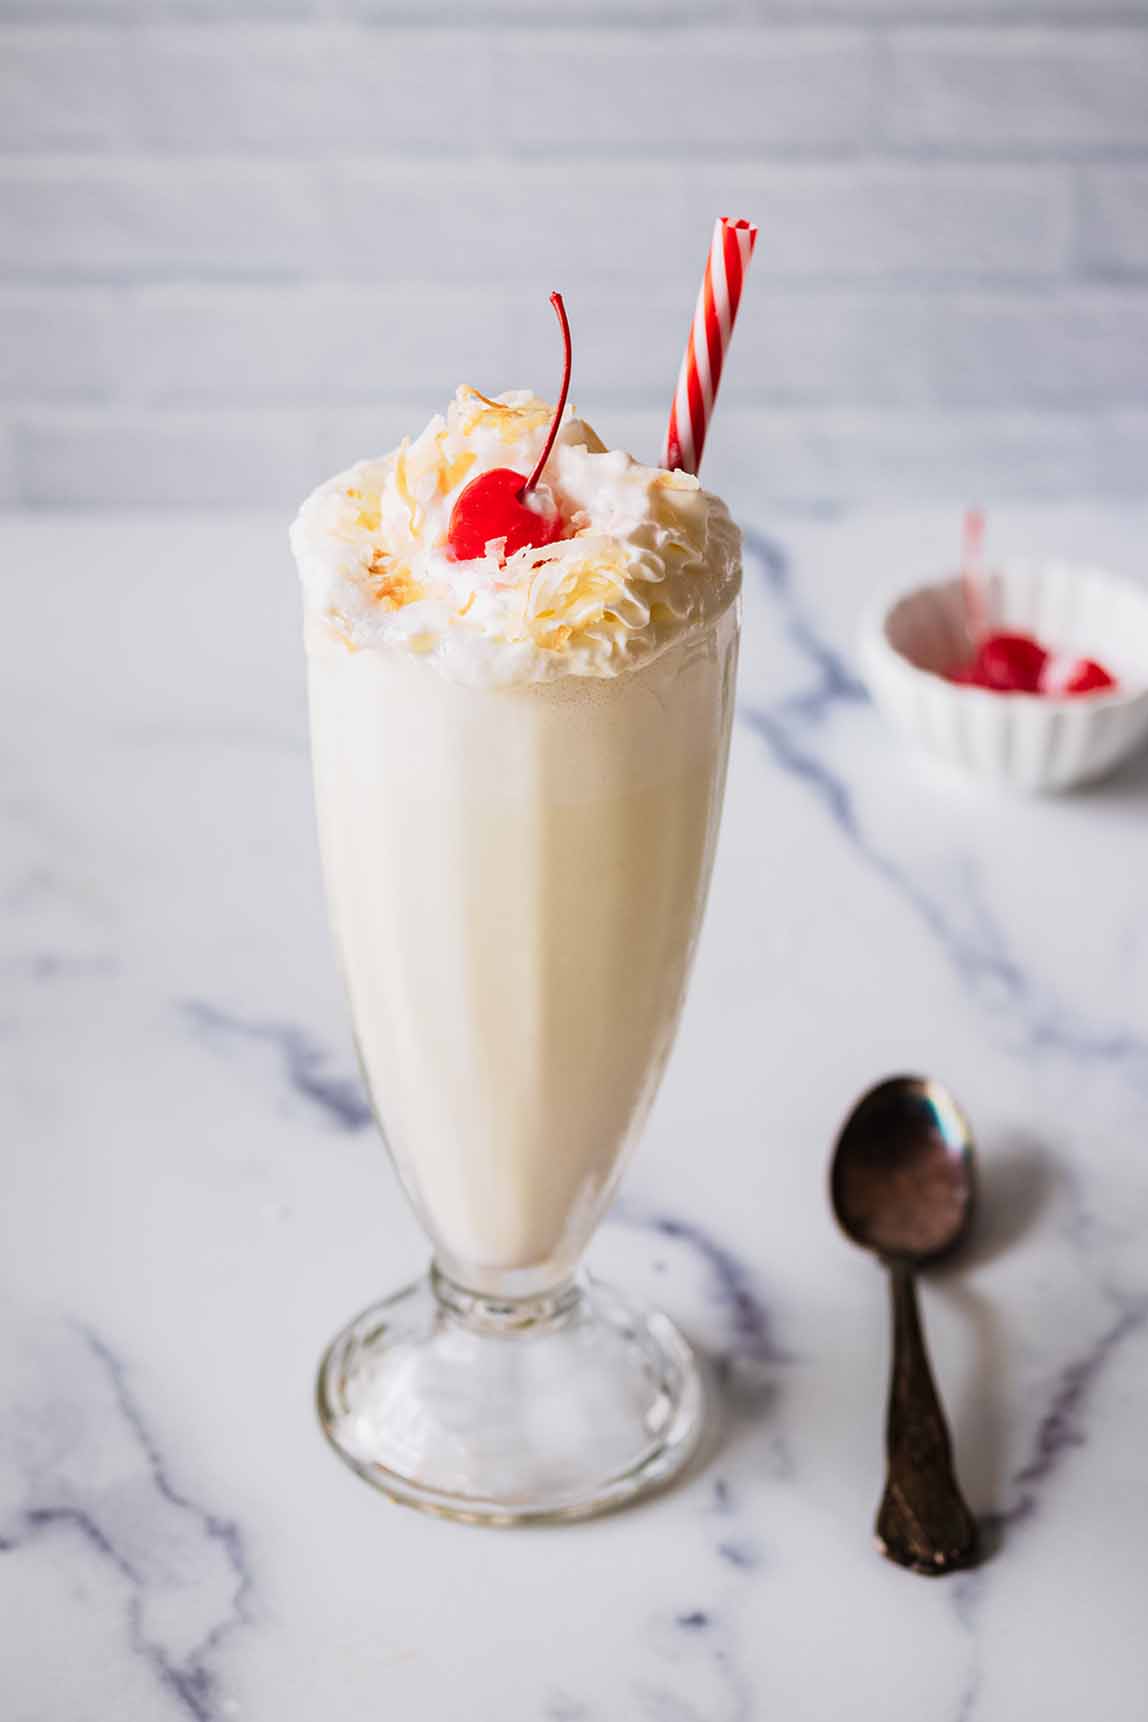 Coconut shake topped with whipped cream, toasted coconut, and a maraschino cherry in a tall glass with a red and white straw